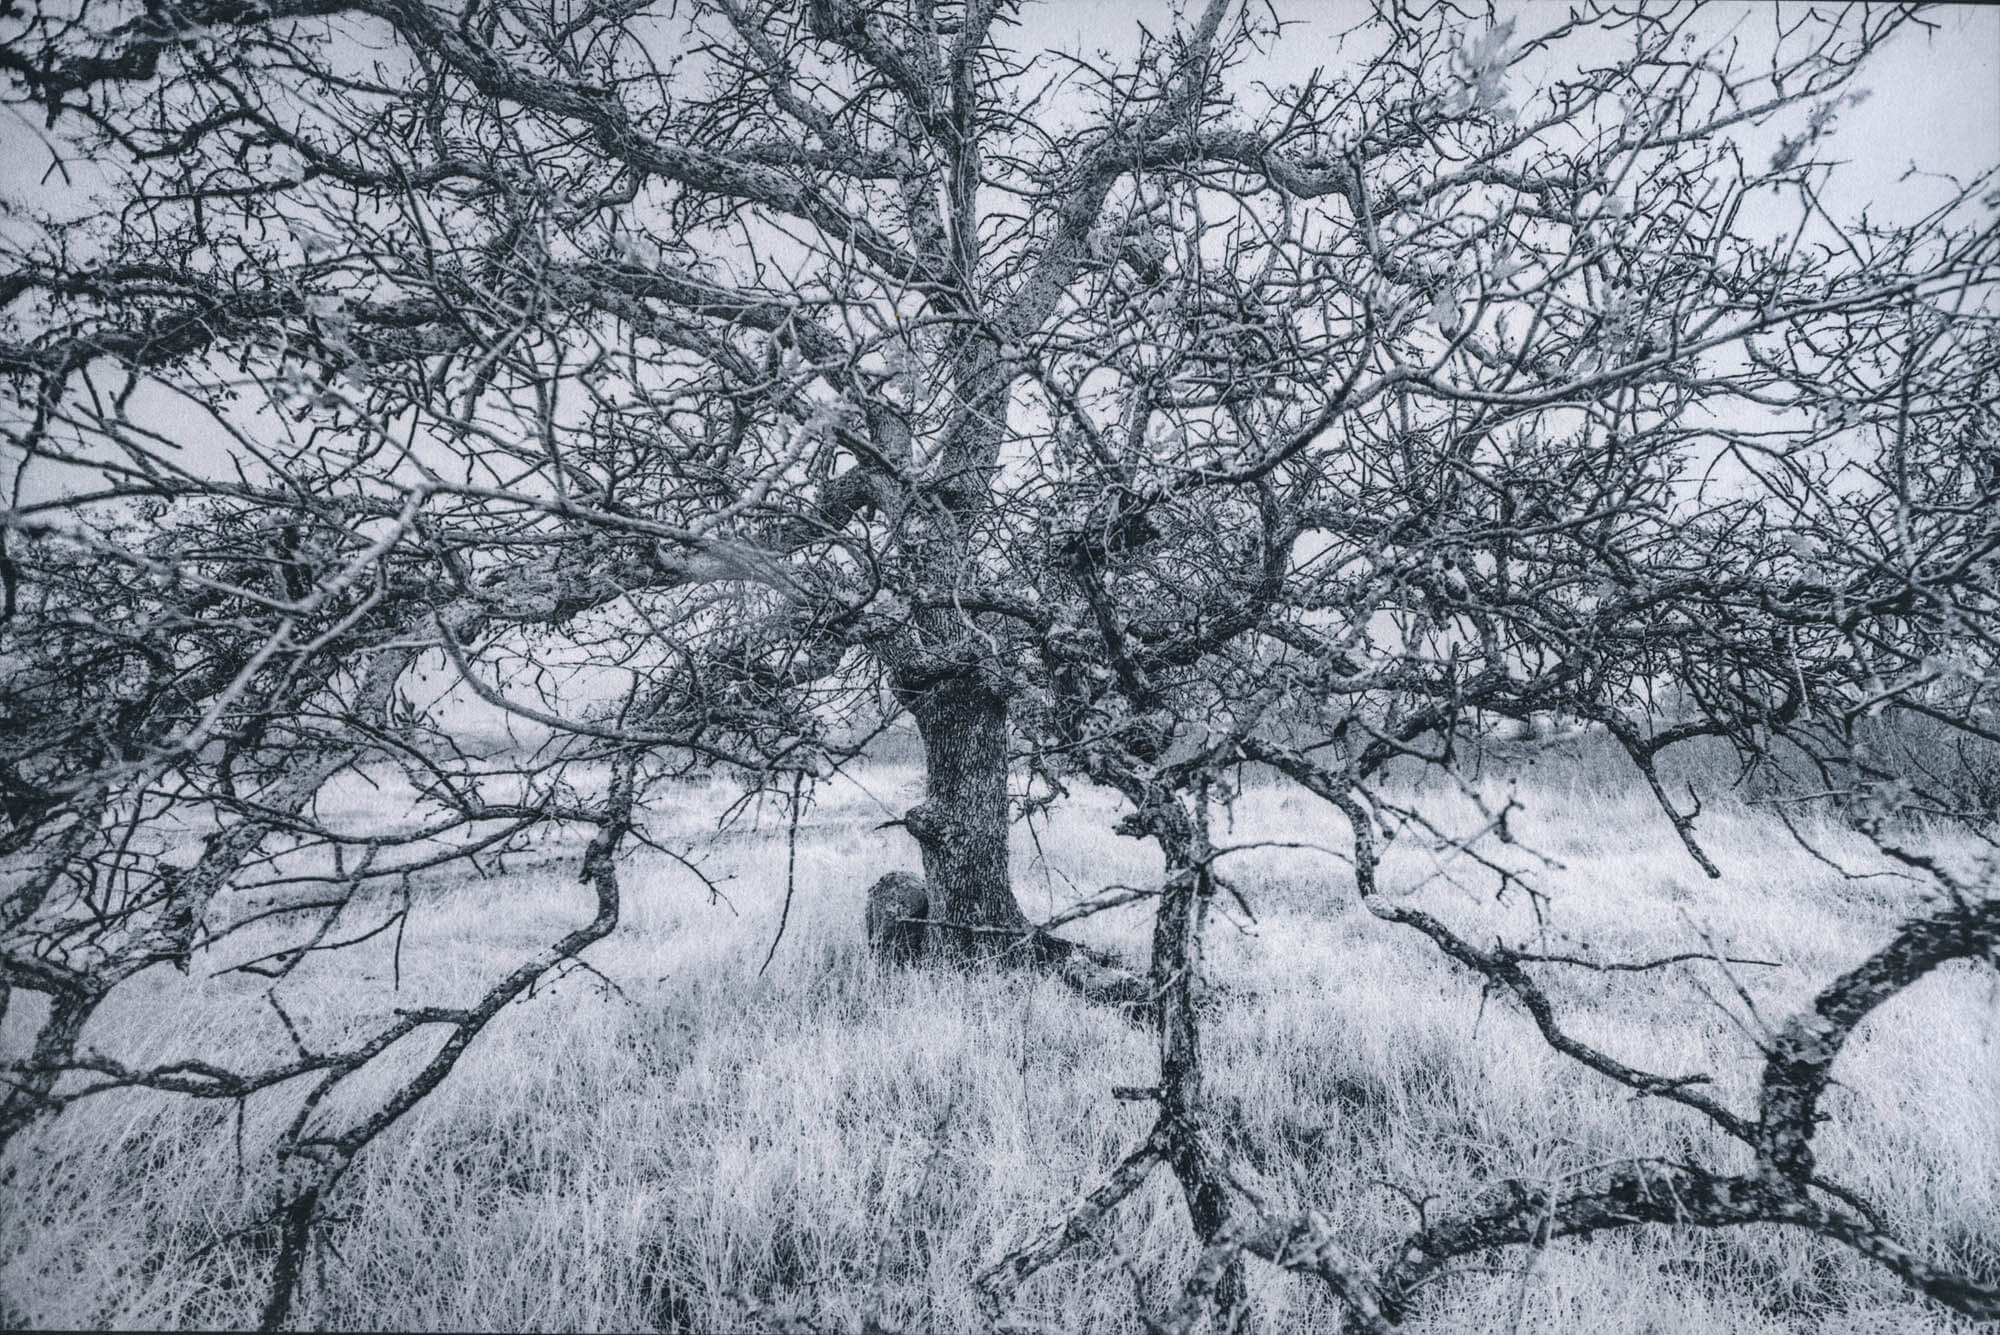 Hooker Oak Pre-exposure humidity - By Christina Z. Anderson